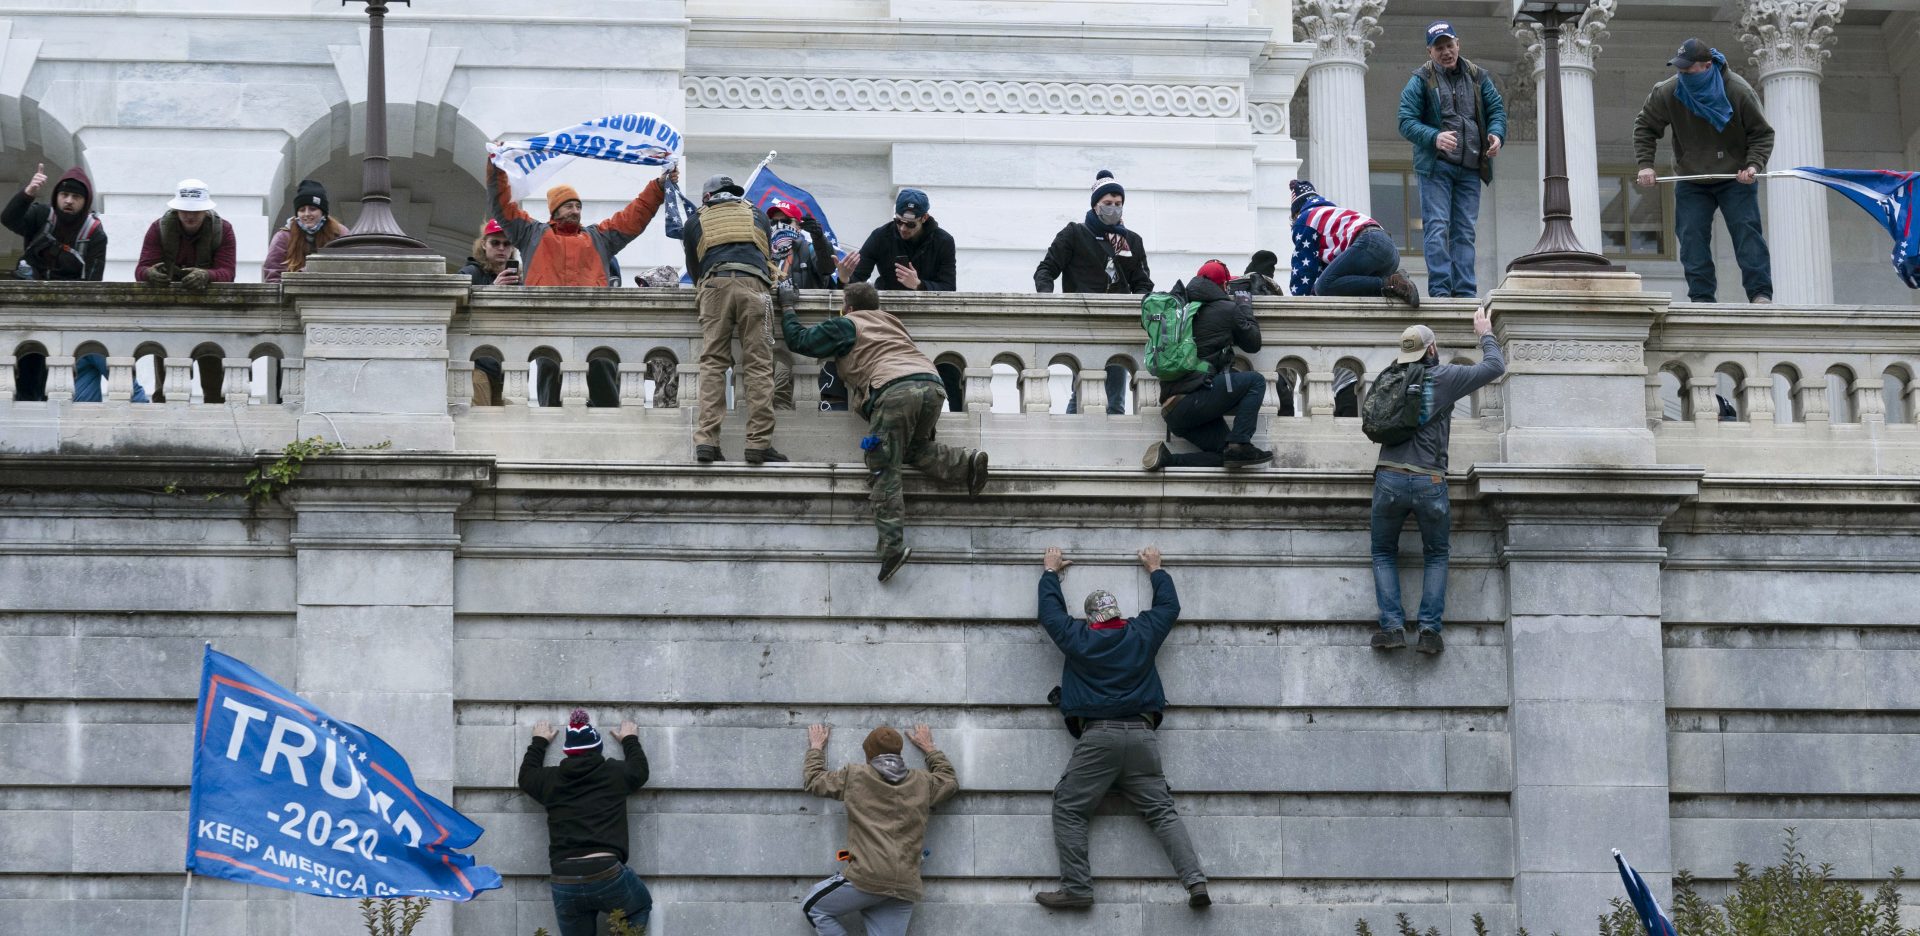 Supporters of President Donald Trump climb the west wall of the the U.S. Capitol on Wednesday, Jan. 6, 2021, in Washington.